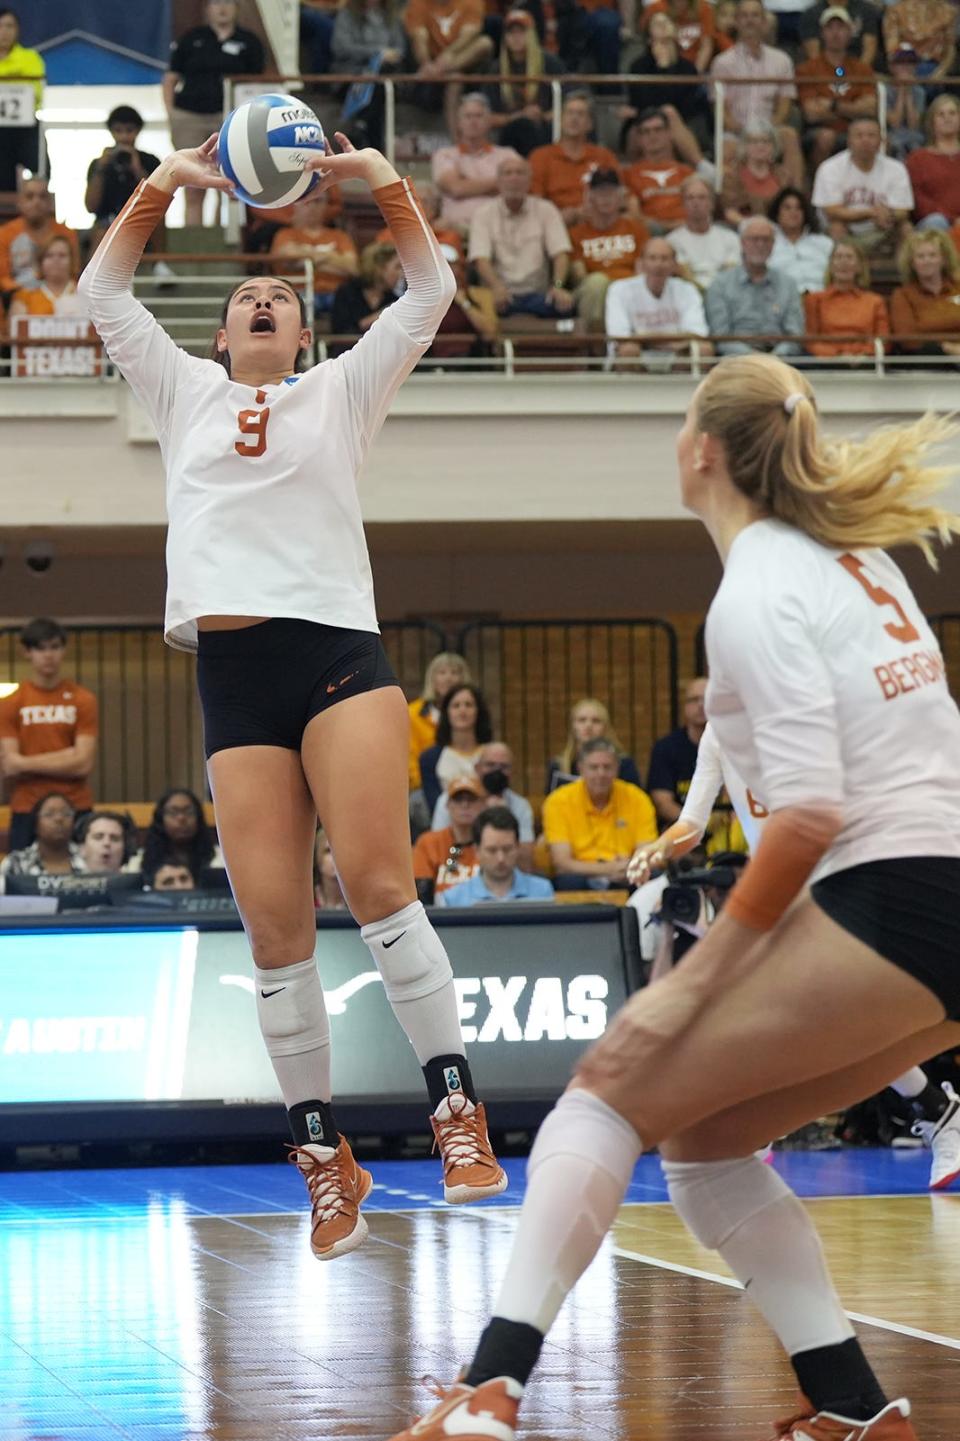 Texas setter Saige Ka'aha'aina-Torres sets up a teammate during the 3-1 win over Marquette in the Sweet 16. "Before, I was kind of out there gunslinging," she said. "This year watching film, I feel like I understand the game so much more."